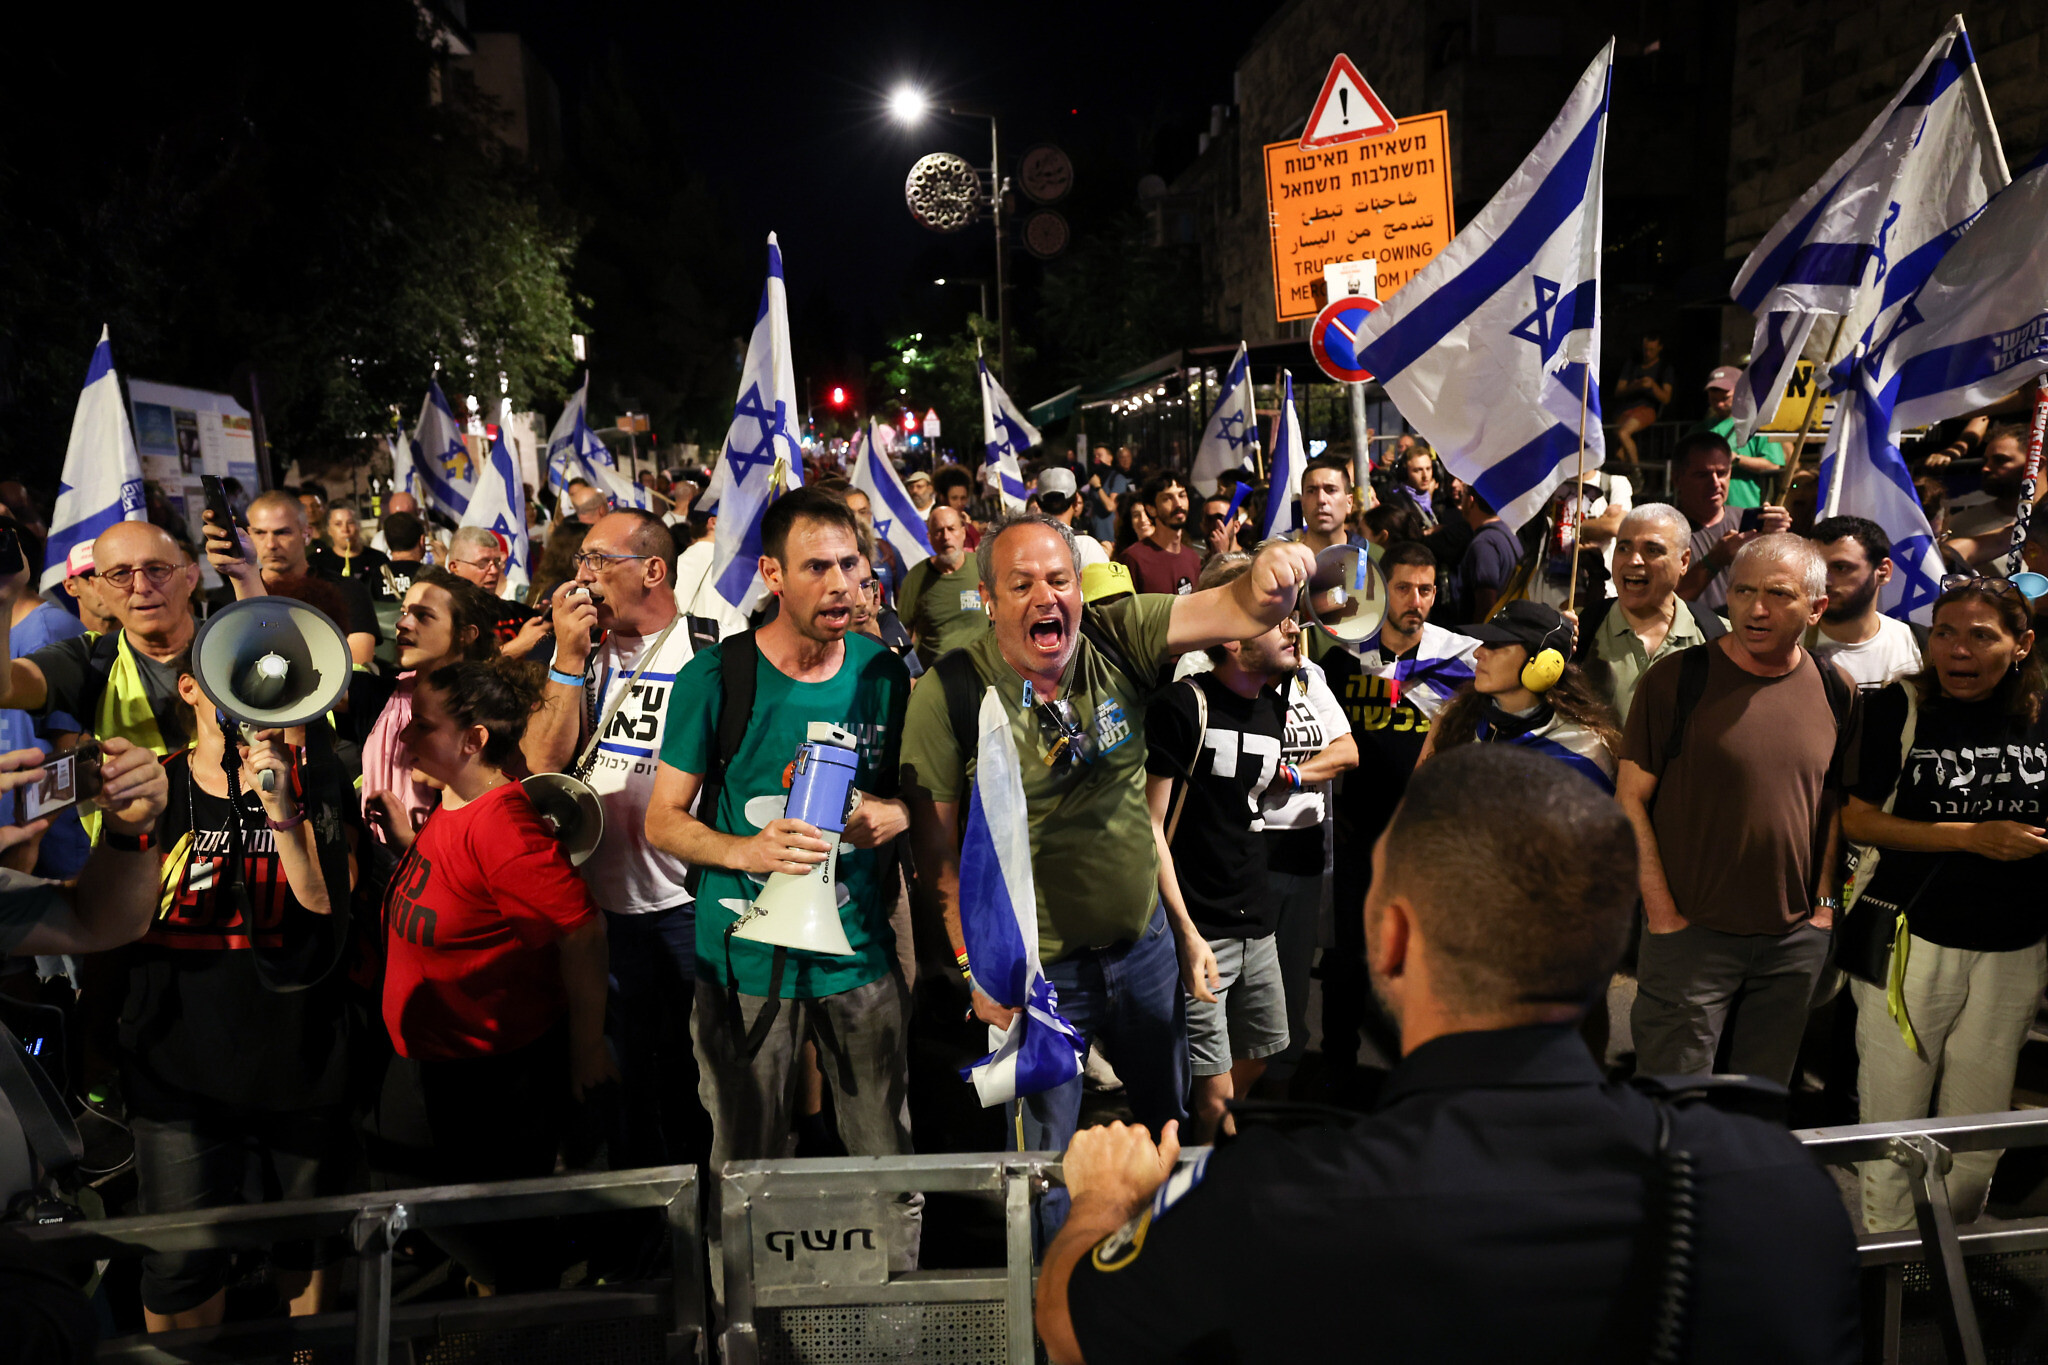  June 17: Anti-gov`t rally near PM`s home descends into violent clashes; 9 arrested | The Times of Israel 